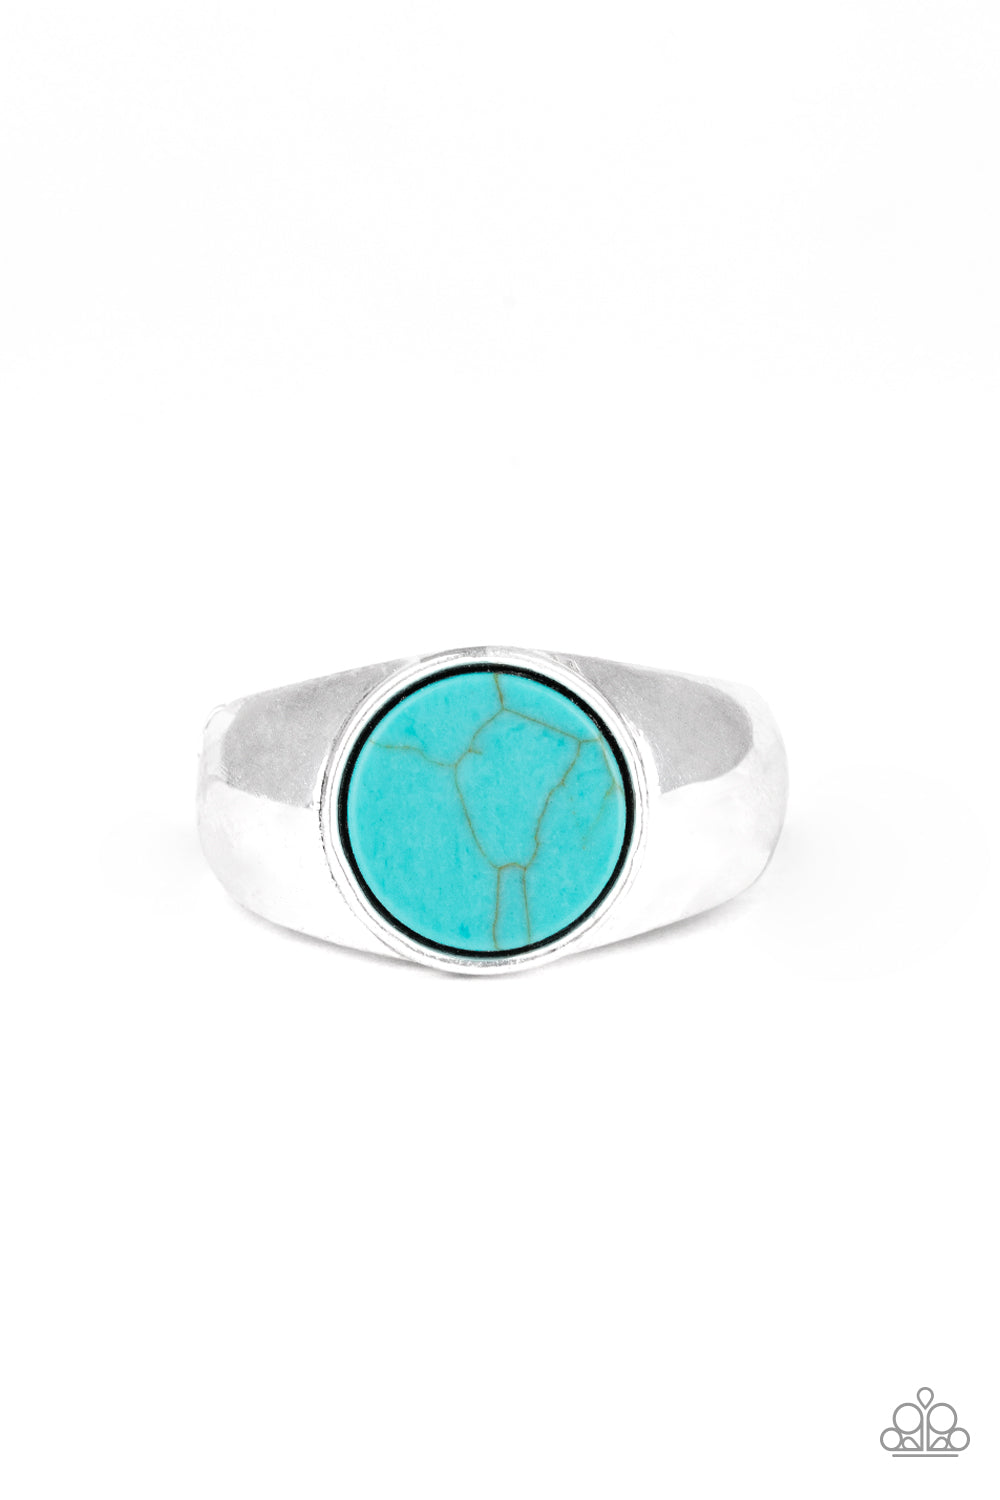 CARBON PRINT - BLUE TURQUOISE MARBLE SILVER RING